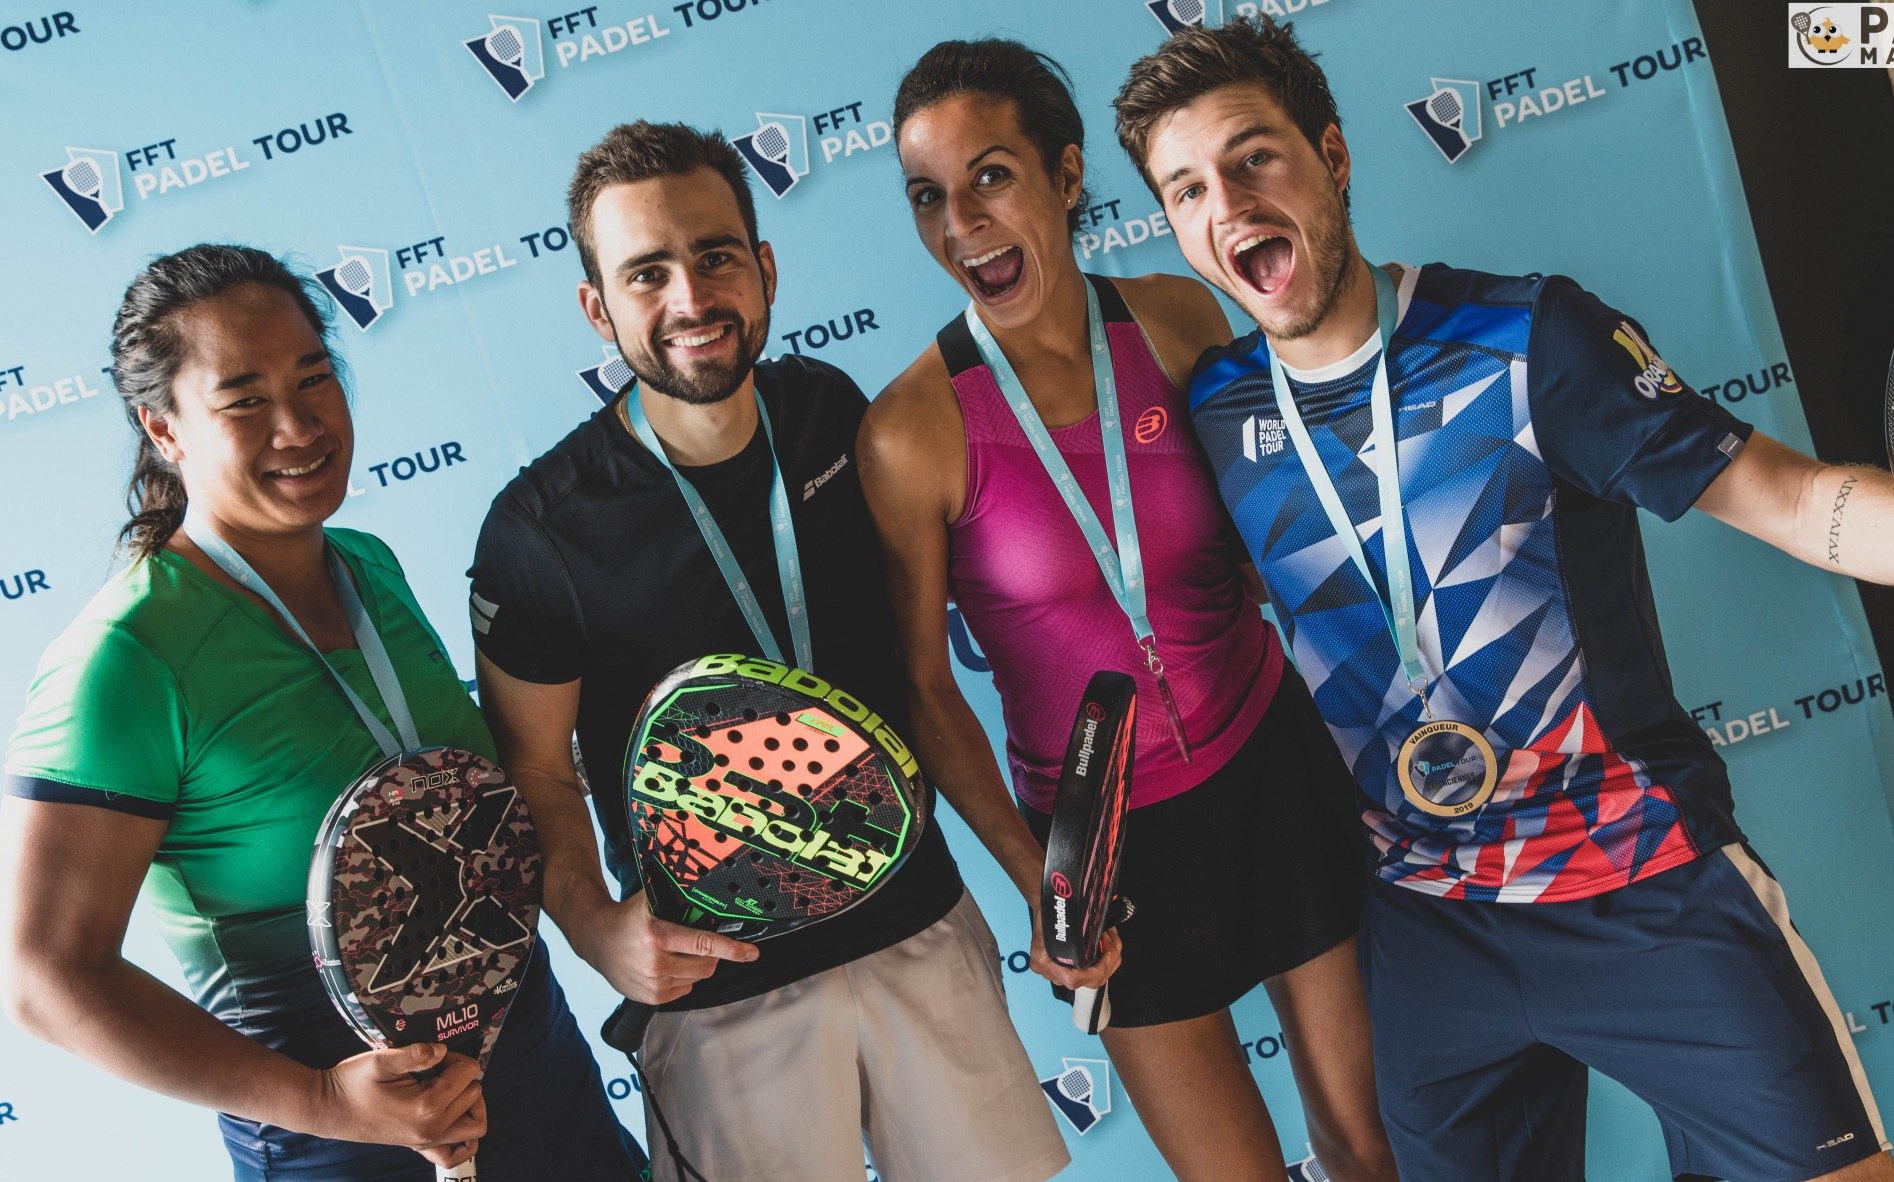 The FFT Padel Tour Valenciennes for Godallier / Martin and Bergeron / Blanqué